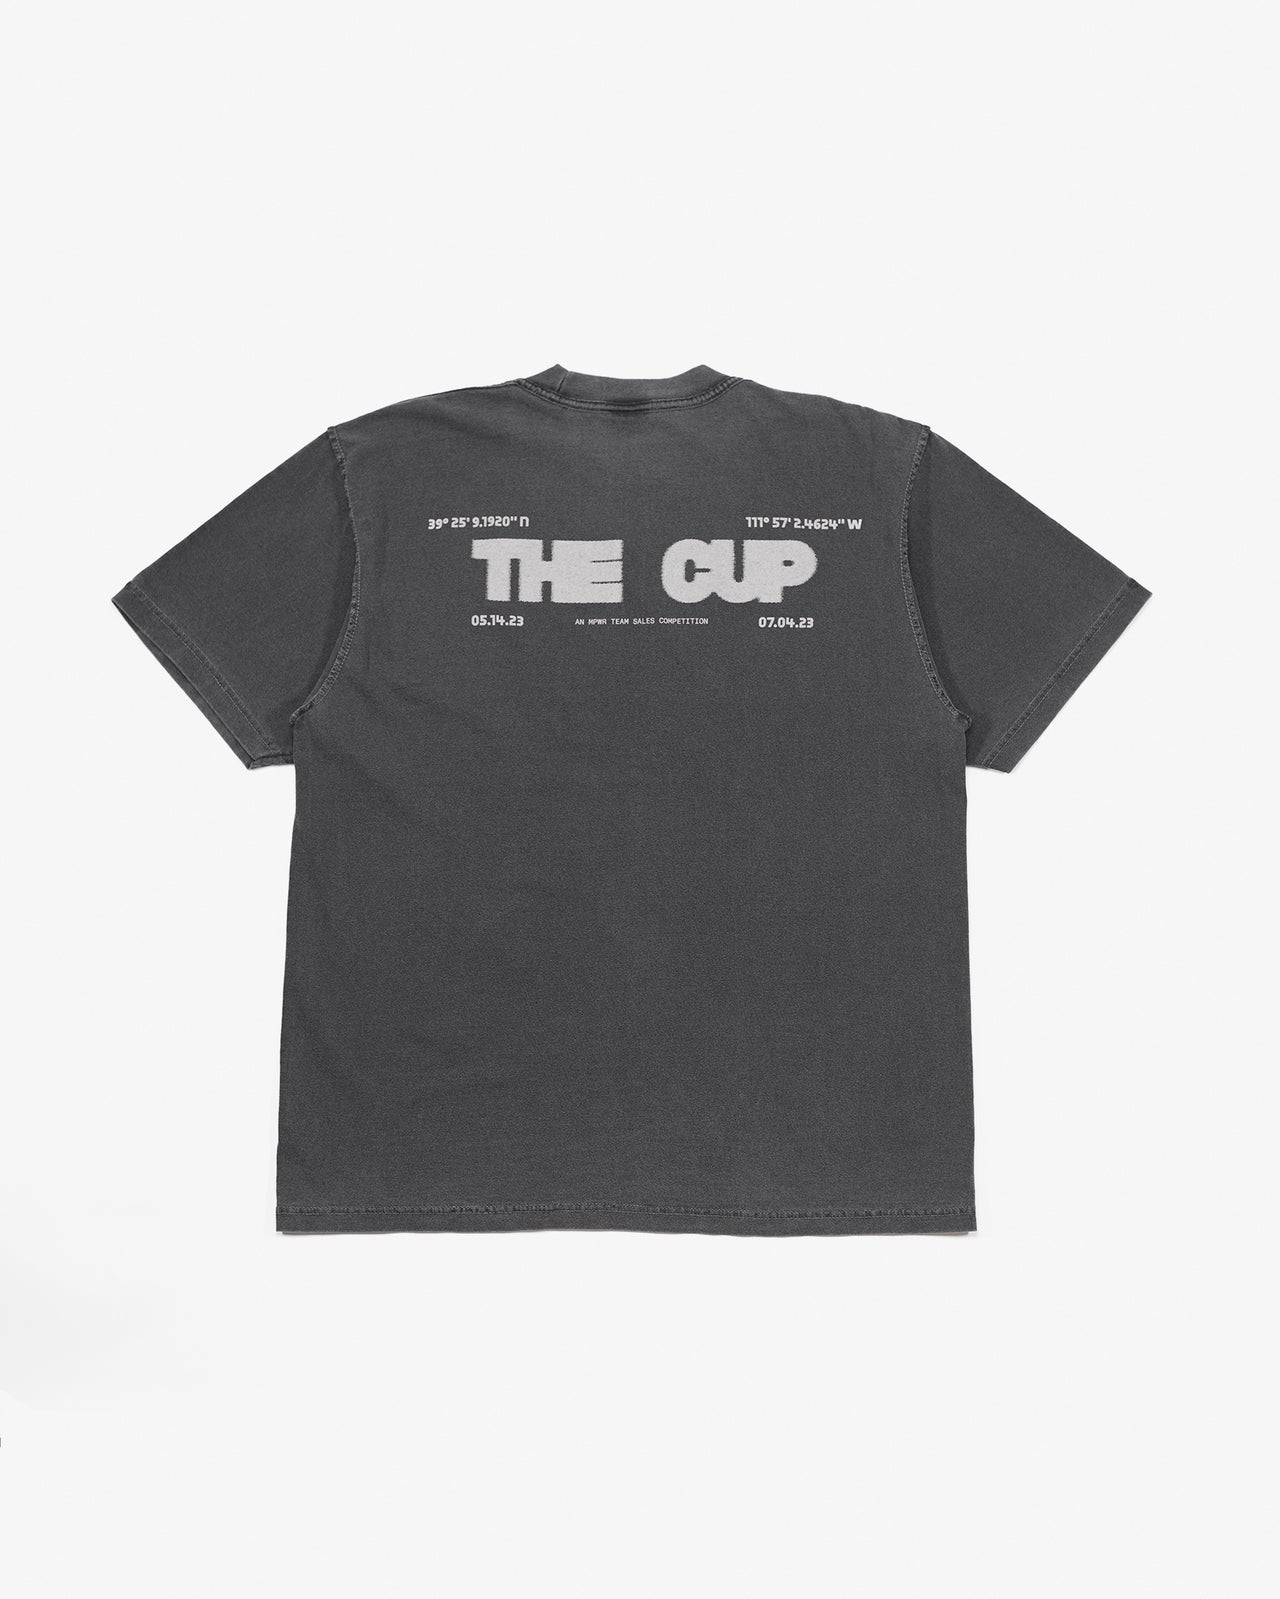 2023 The Cup Shirt